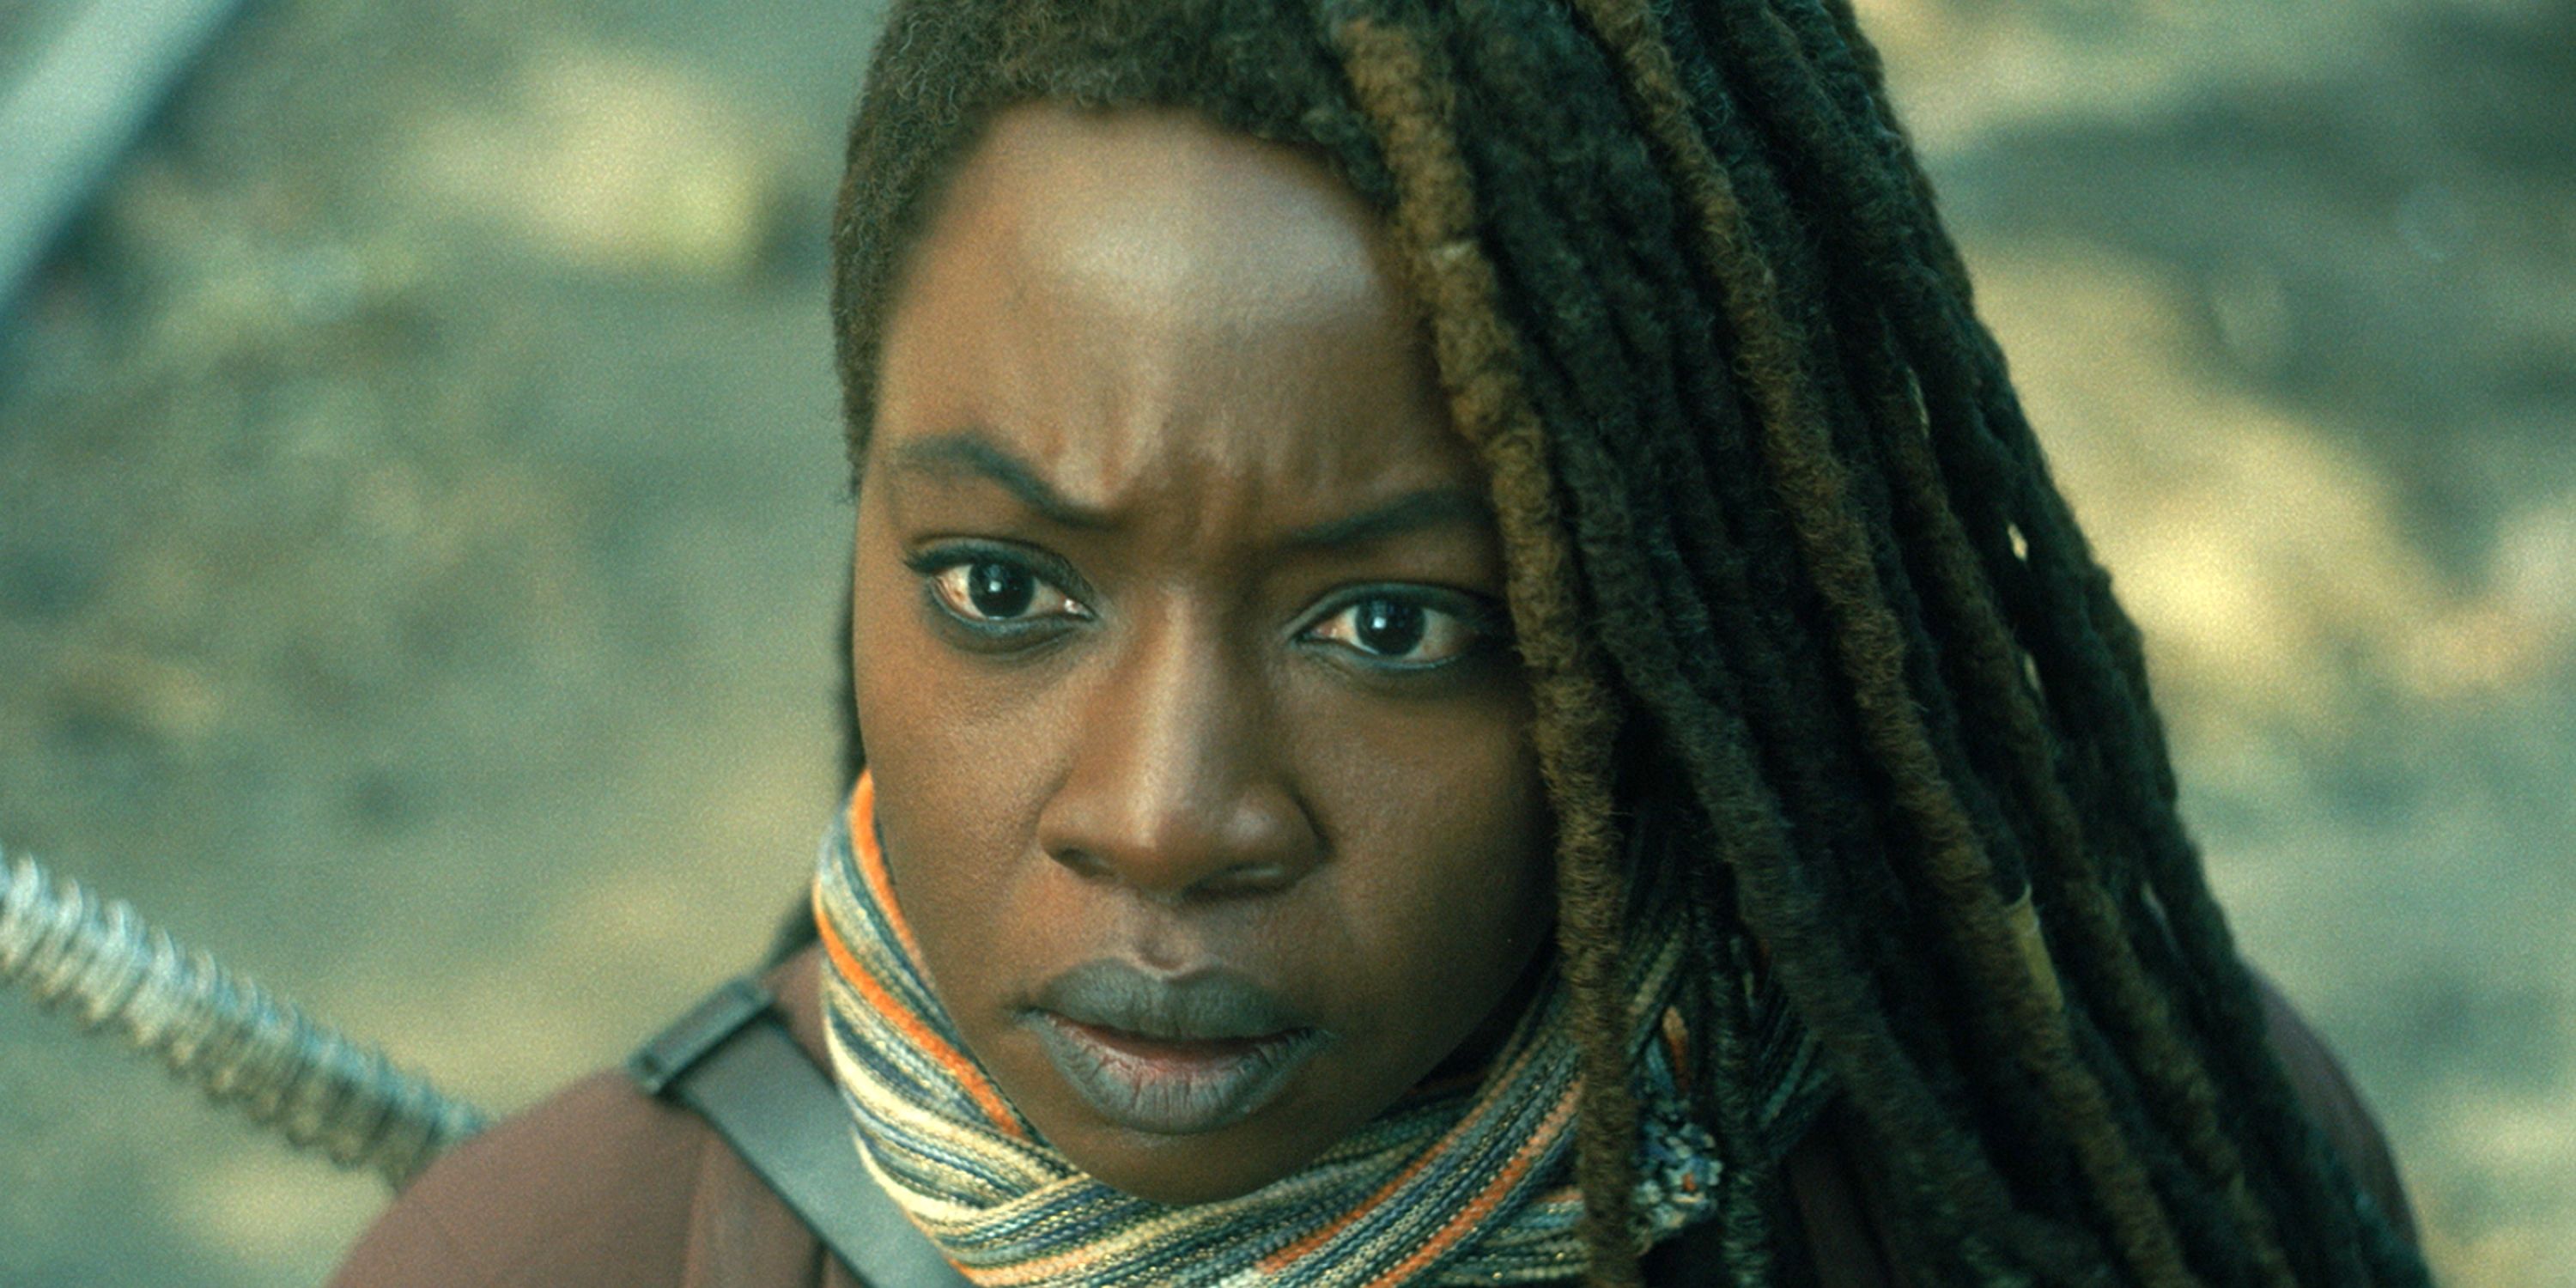 Danai Gurira as Michonne in Episode 0 of Season 1 of AMC's The Walking Dead: The Ones Who Live